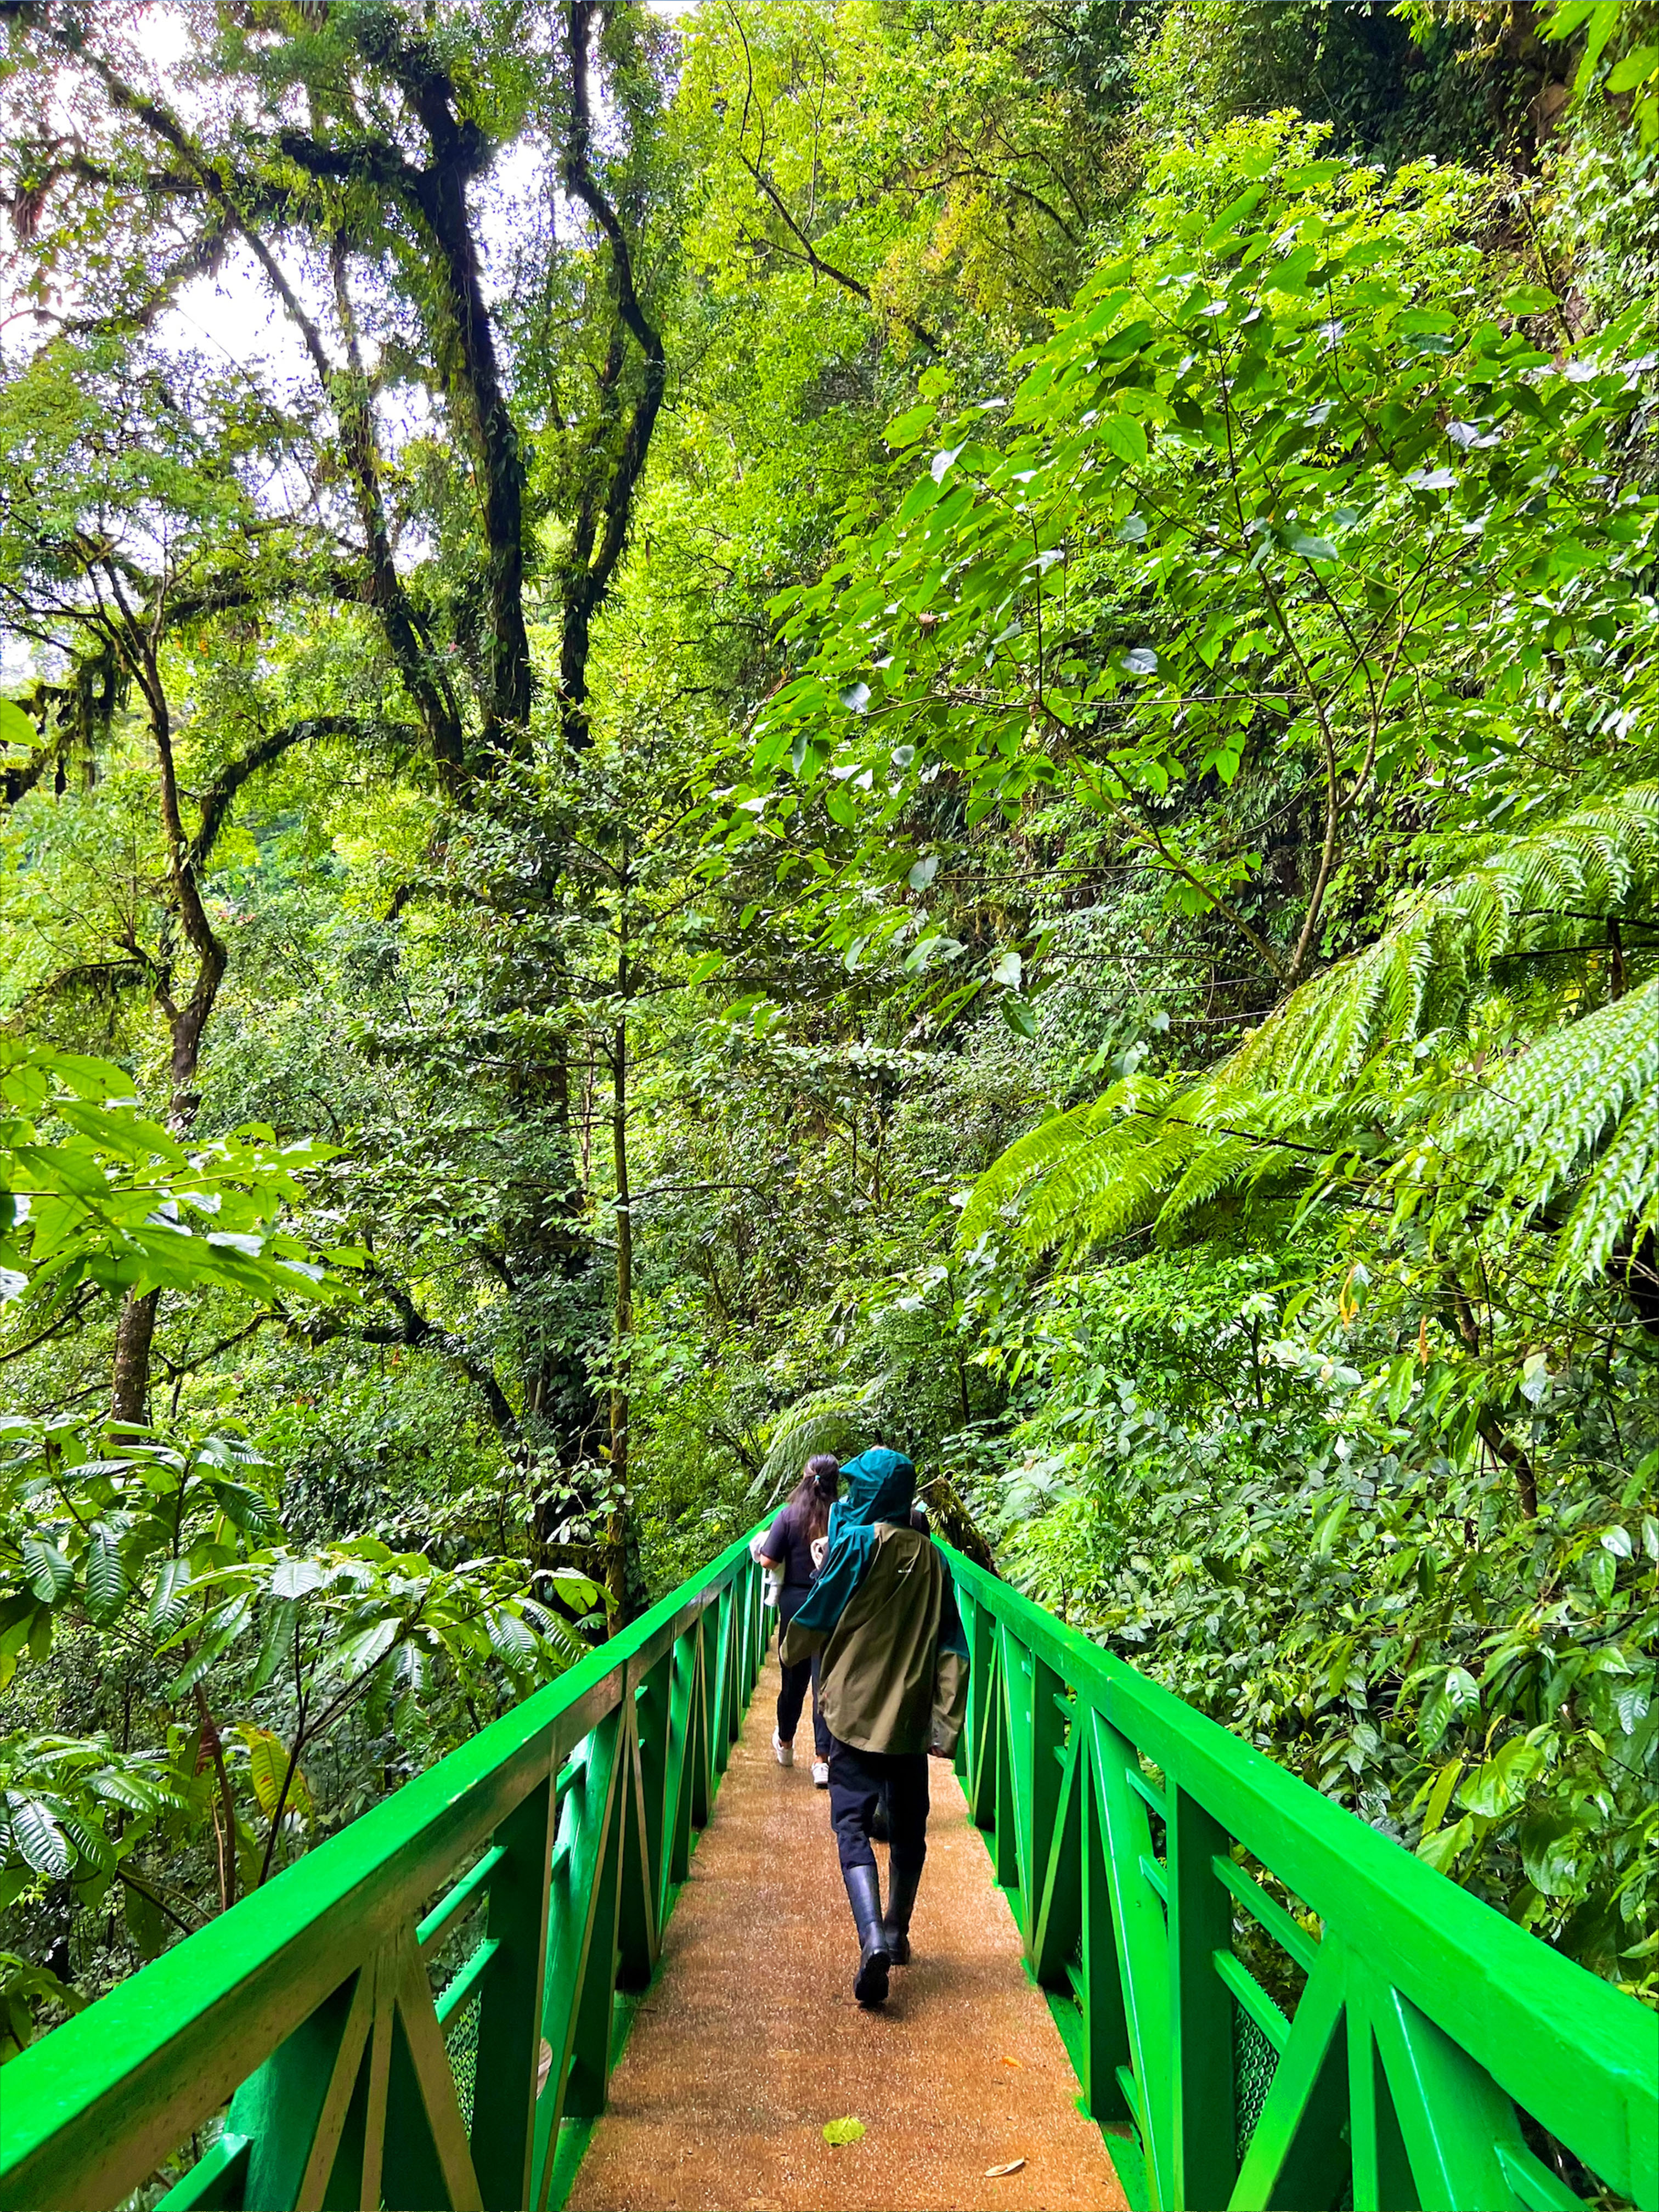 Photo of a student walking across a wooden bridge in the Arenal Volcano National Park in La Fortuna, Costa Rica